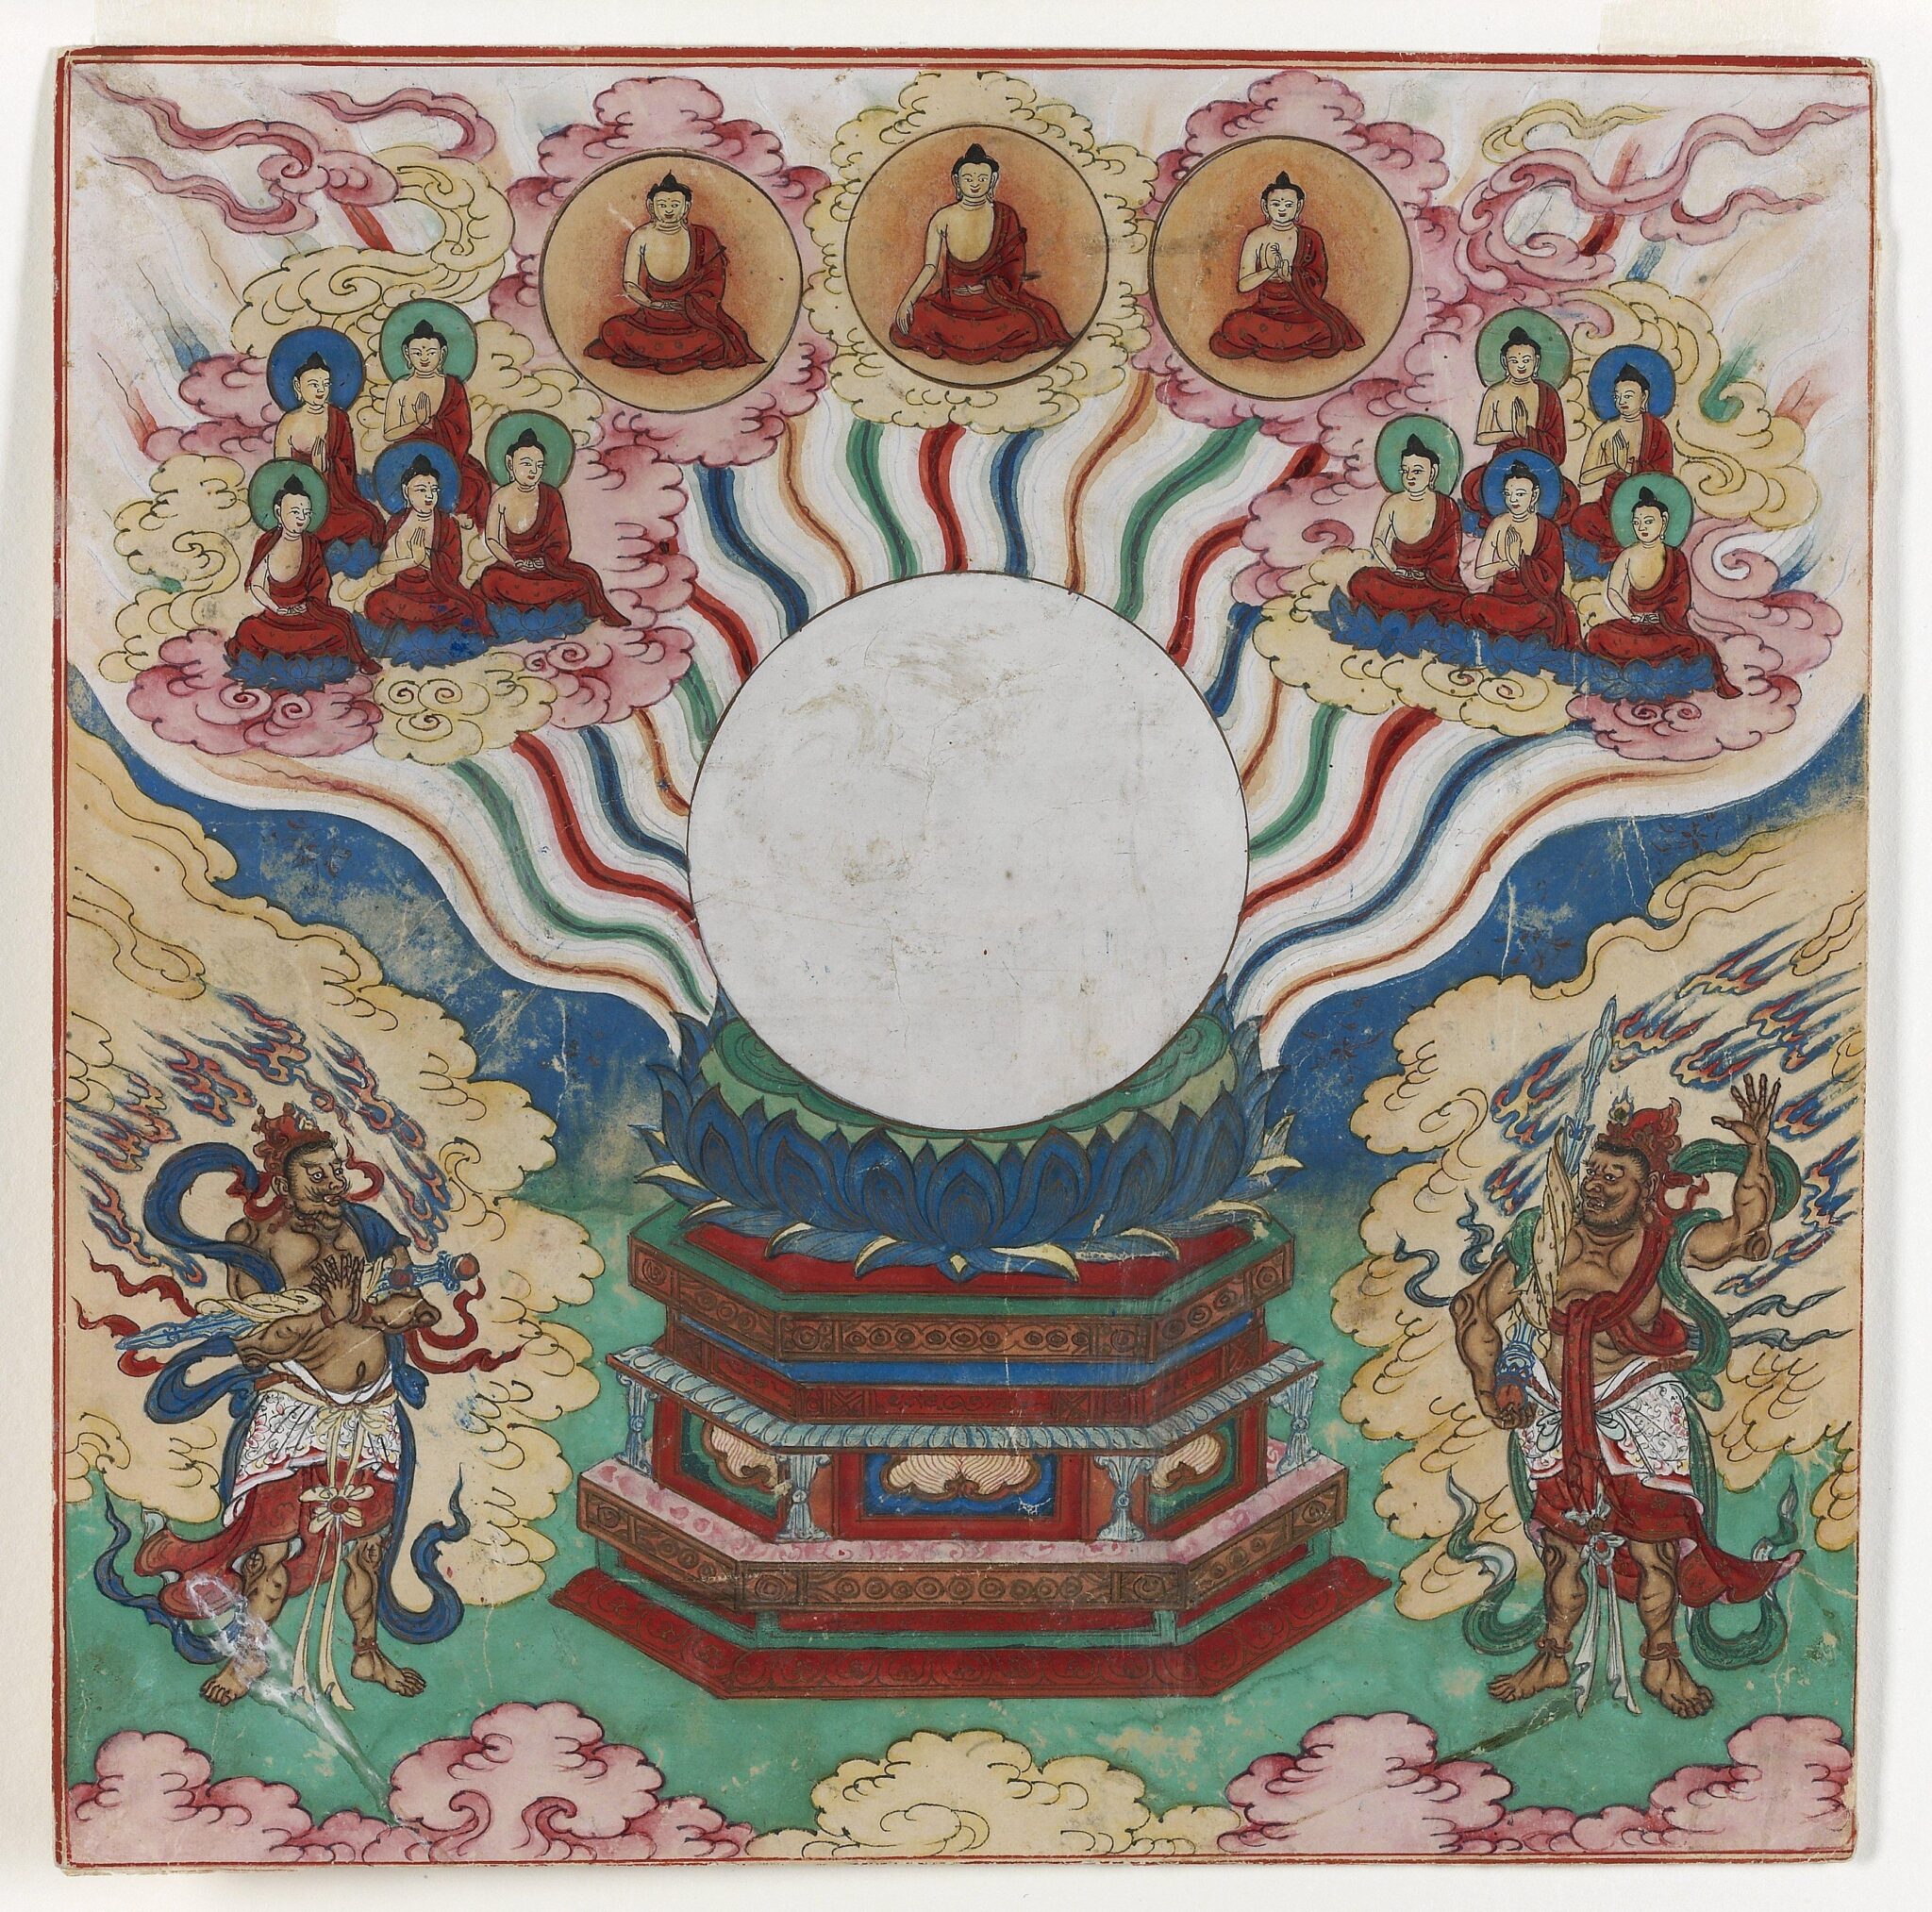 White orb resting on lotus pedestal flanked by wrathful deities; orb emanates rainbow tendrils leading to Buddhas and attendants